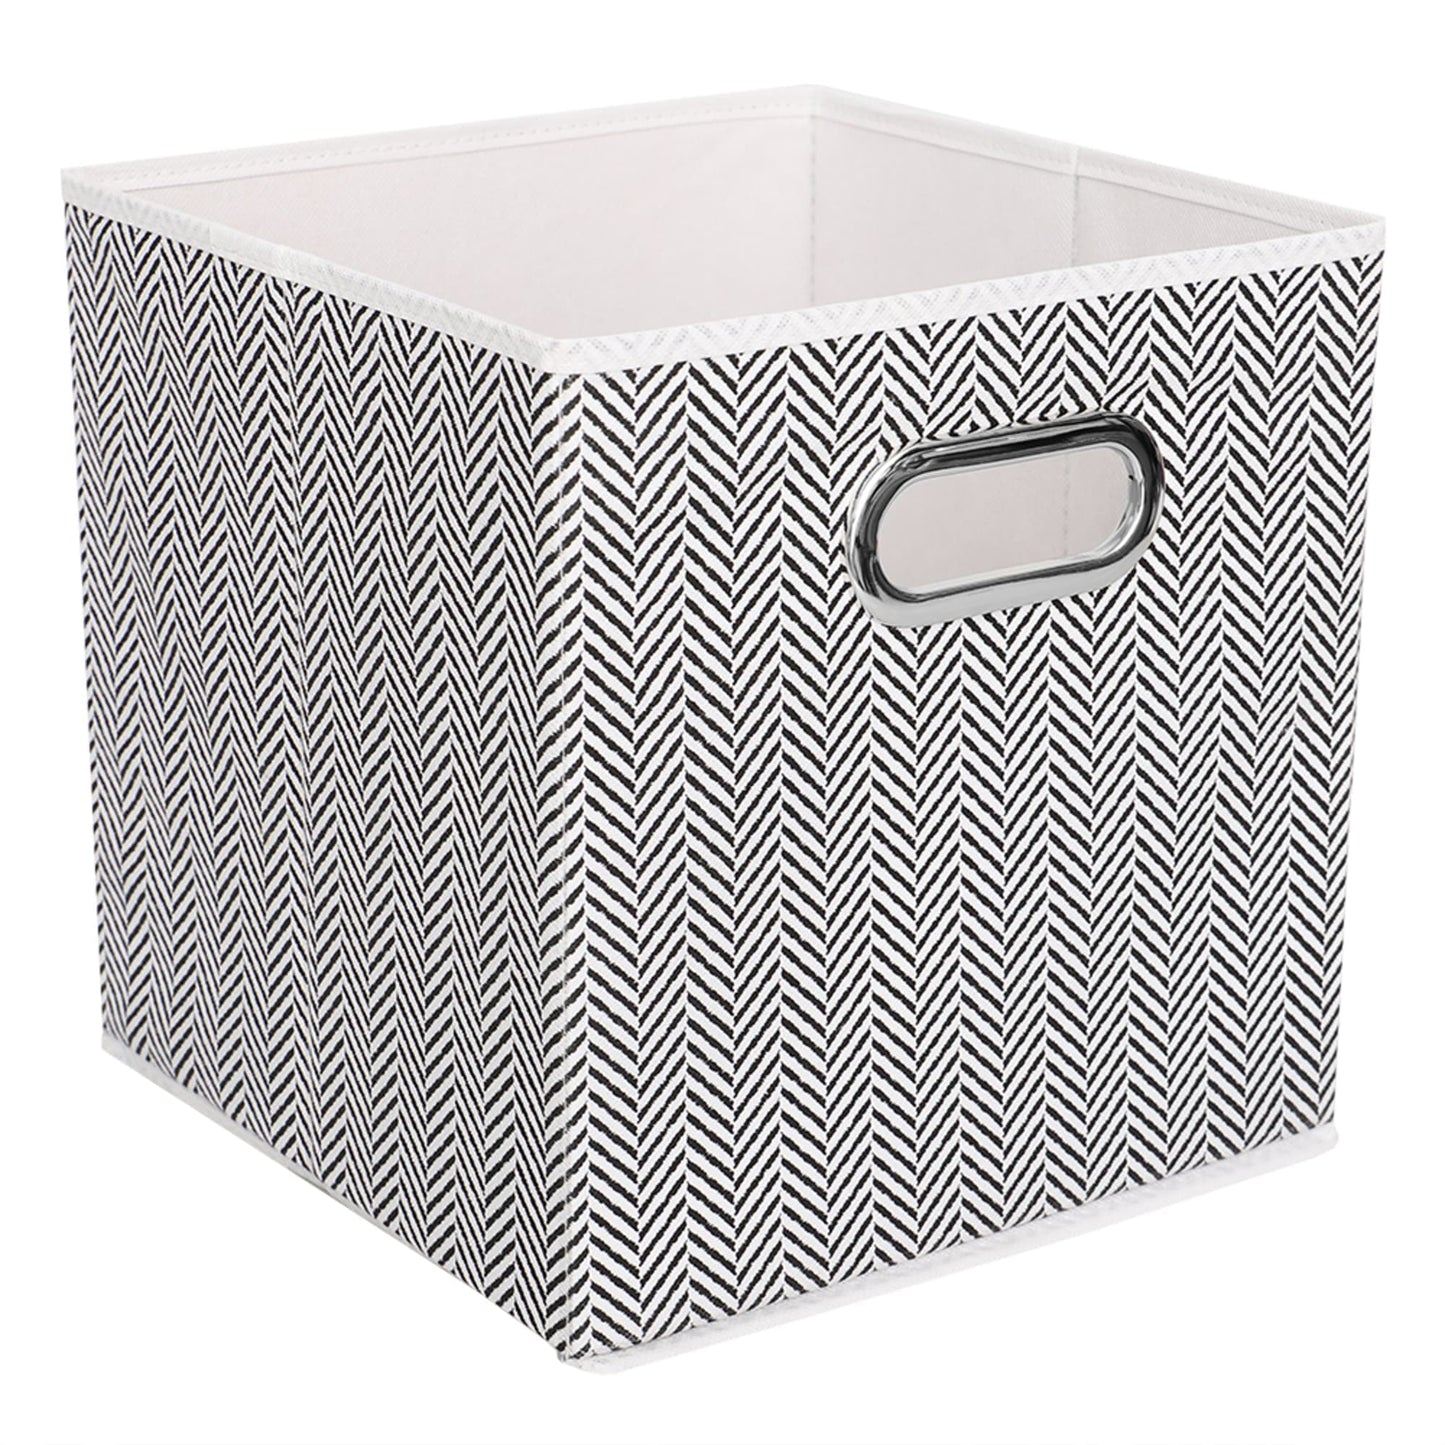 Herring Weave Collapsible Non-Woven Storage Bin with Grommet Handle, Black